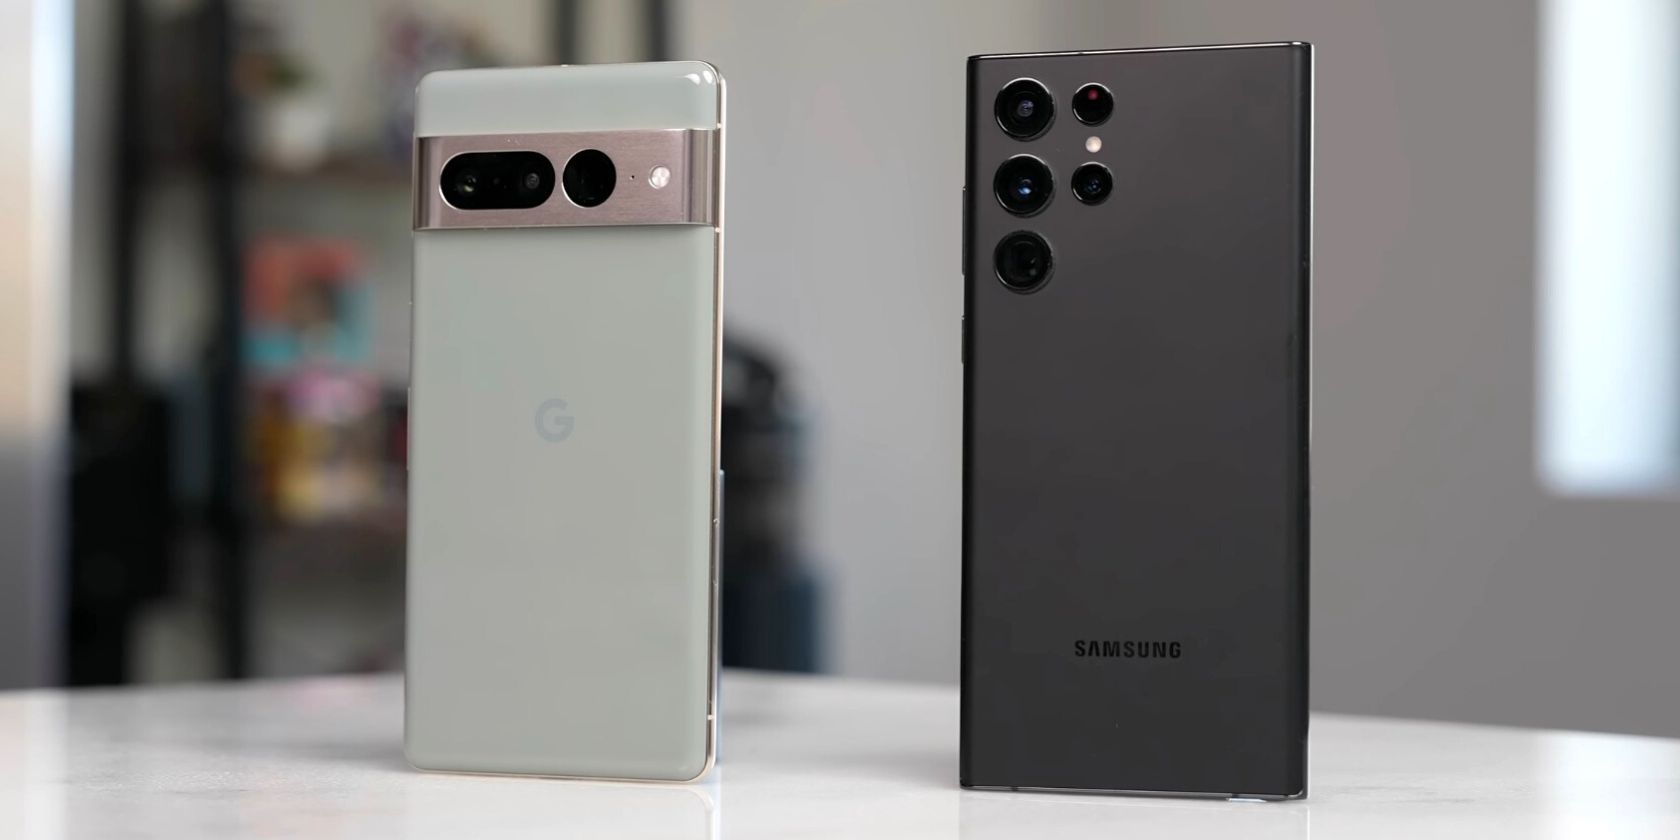 Samsung Galaxy S23 Ultra vs. Google Pixel 7 Pro: Which Android phone wins?